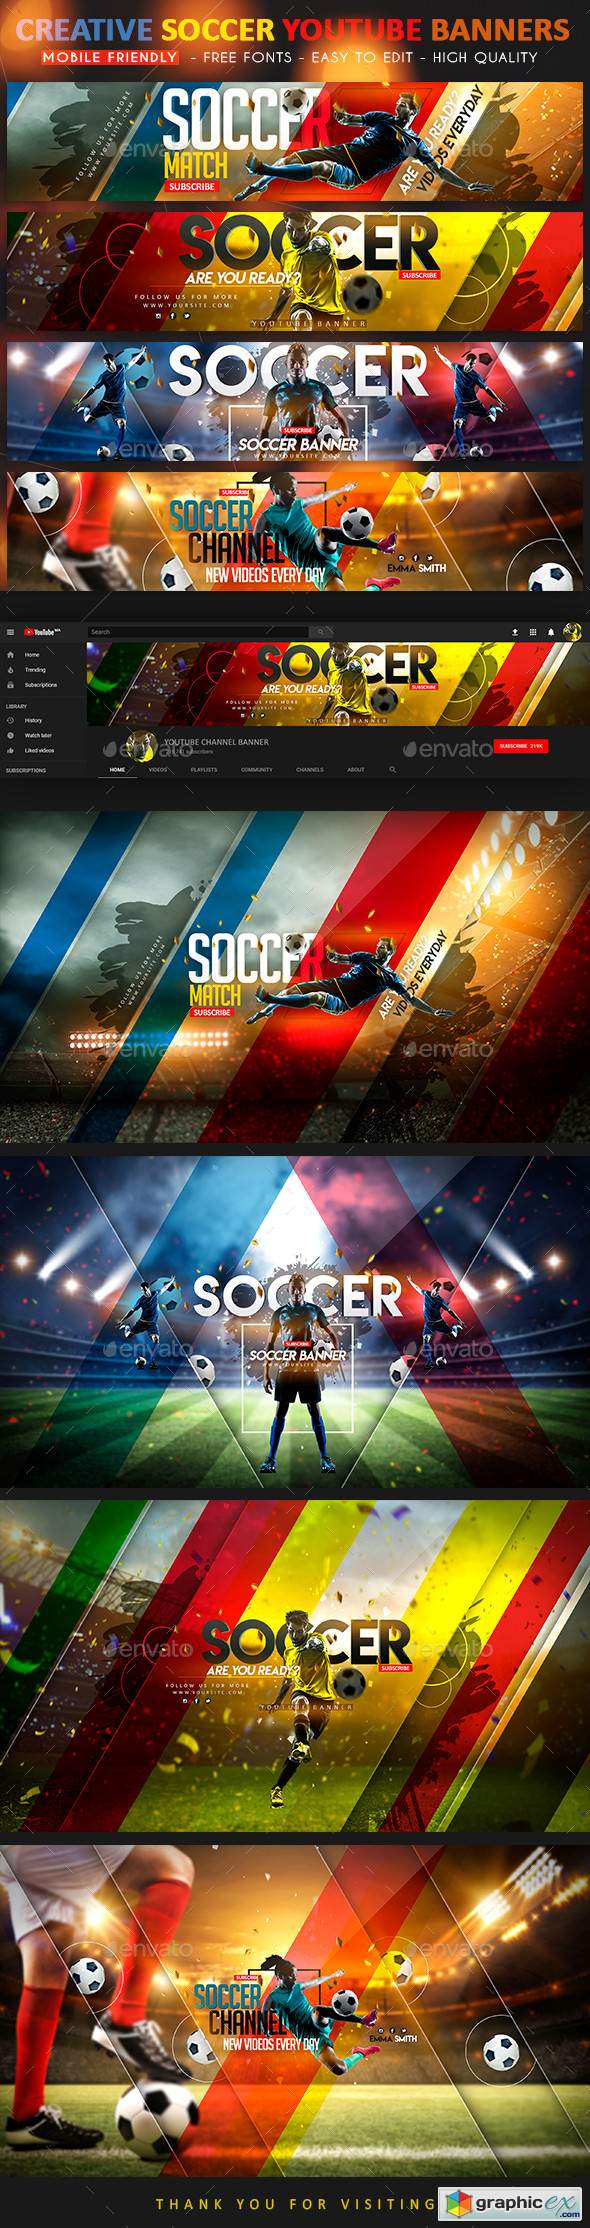 Soccer YouTube Banner » Free Download Vector Stock Image Photoshop Icon